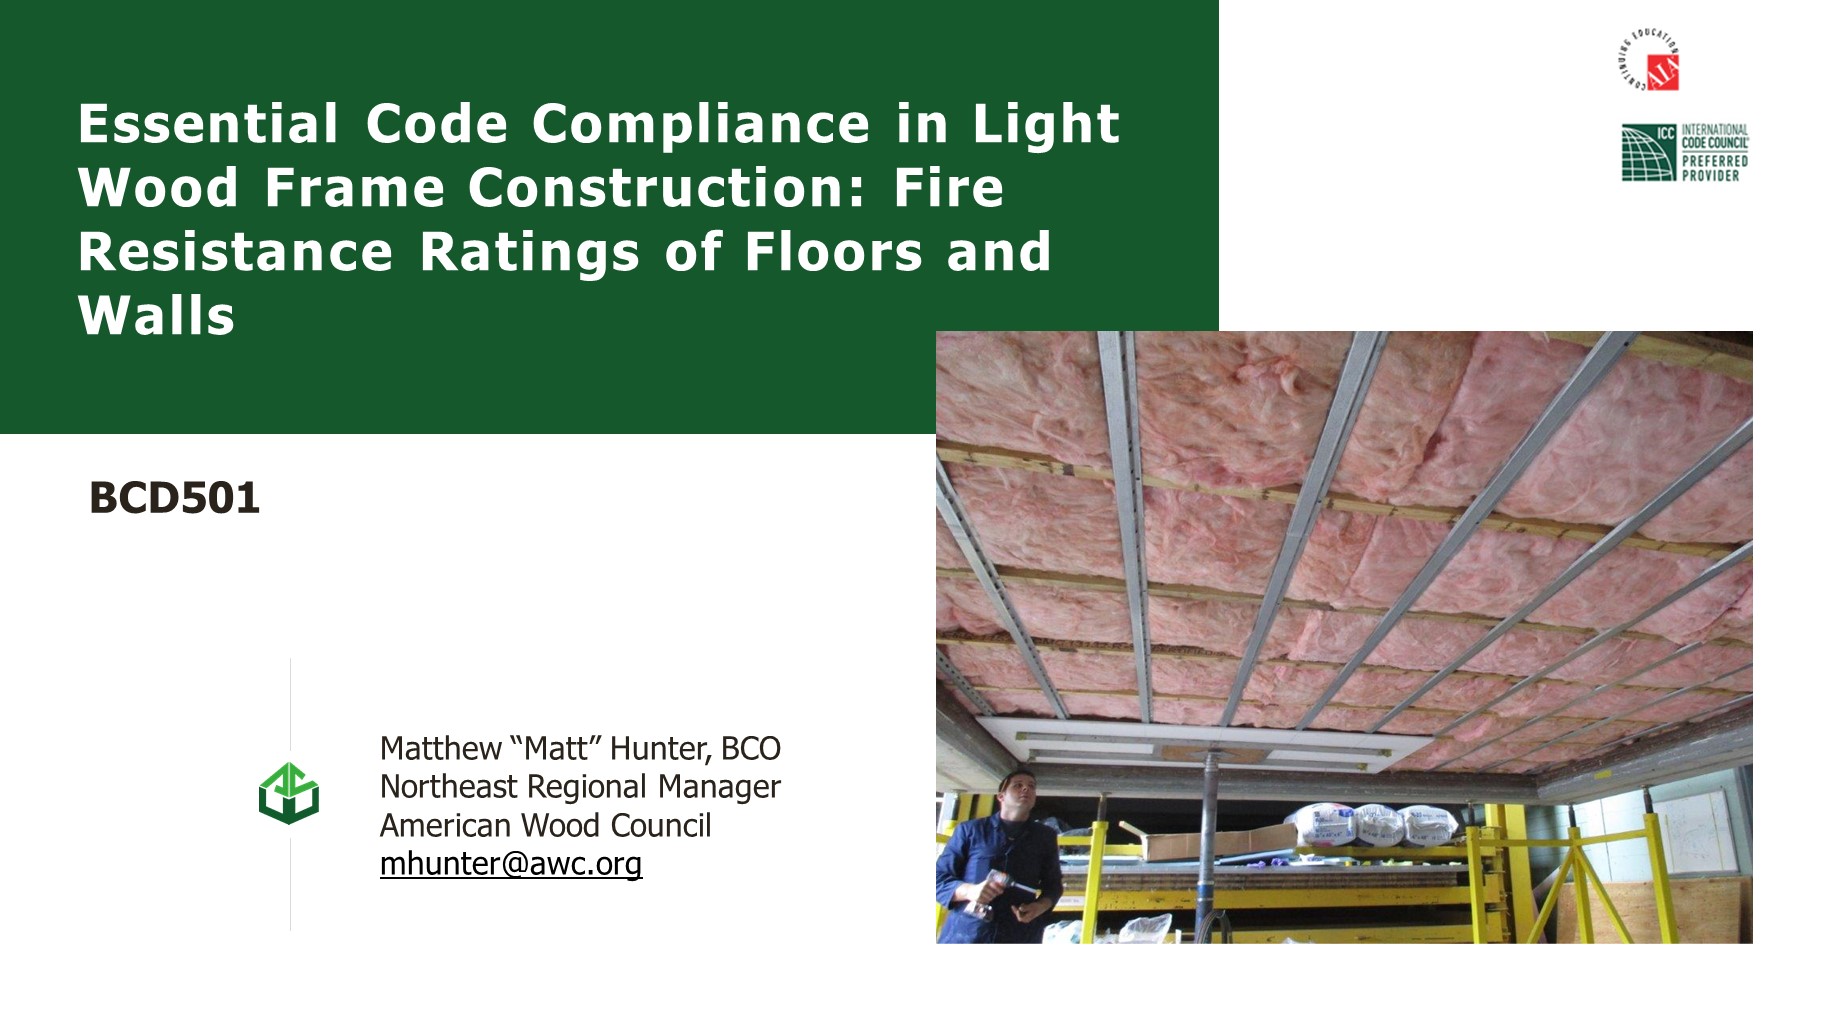 Essential Code Compliance in Light Wood Frame Construction: Fire Resistance Ratings of Floors & Walls